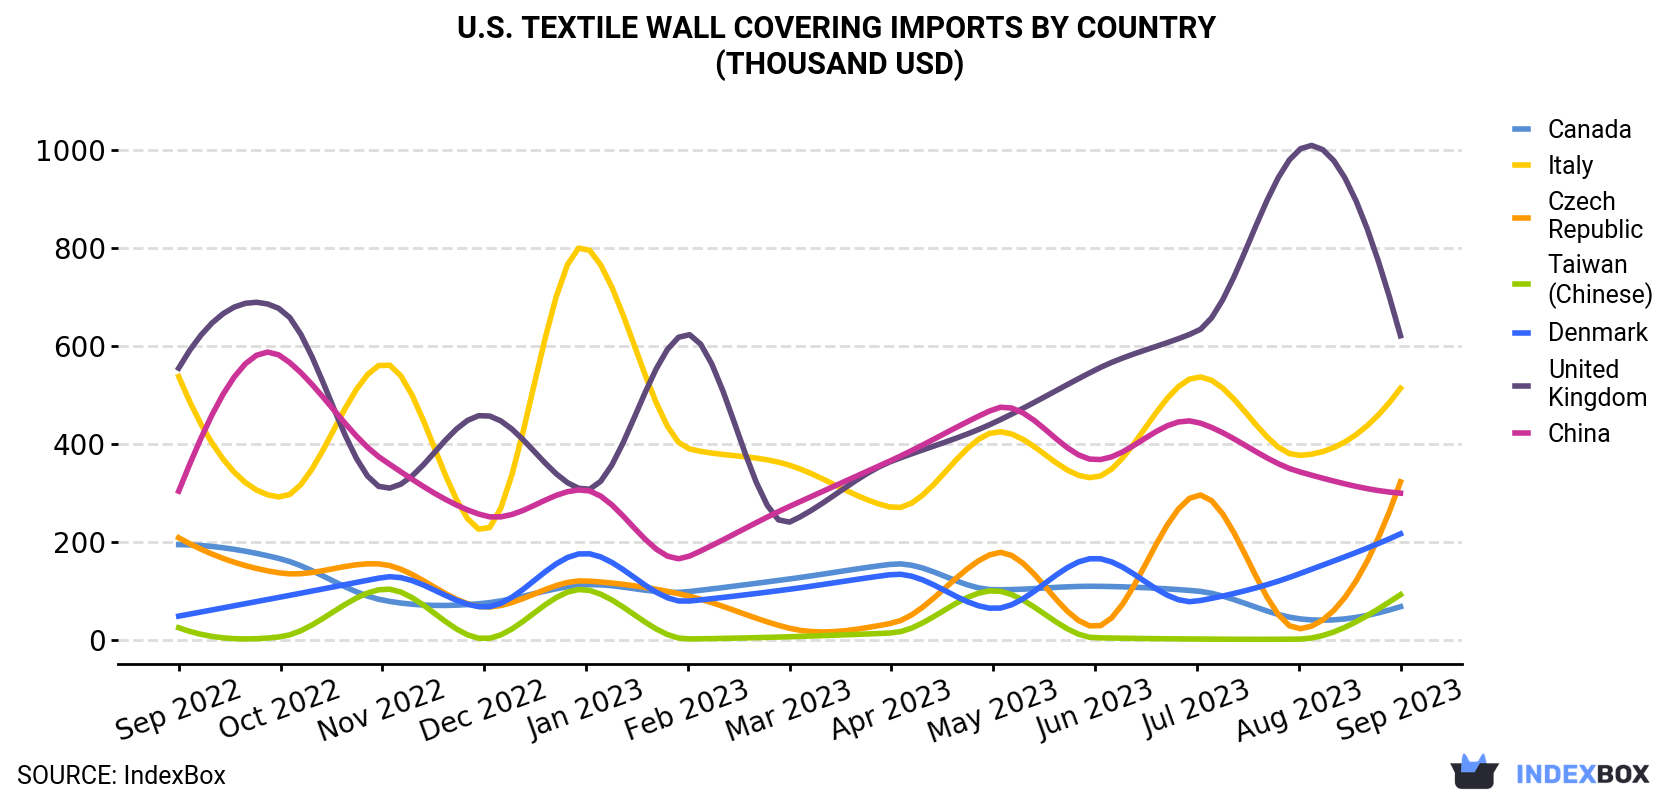 U.S. Textile Wall Covering Imports By Country (Thousand USD)